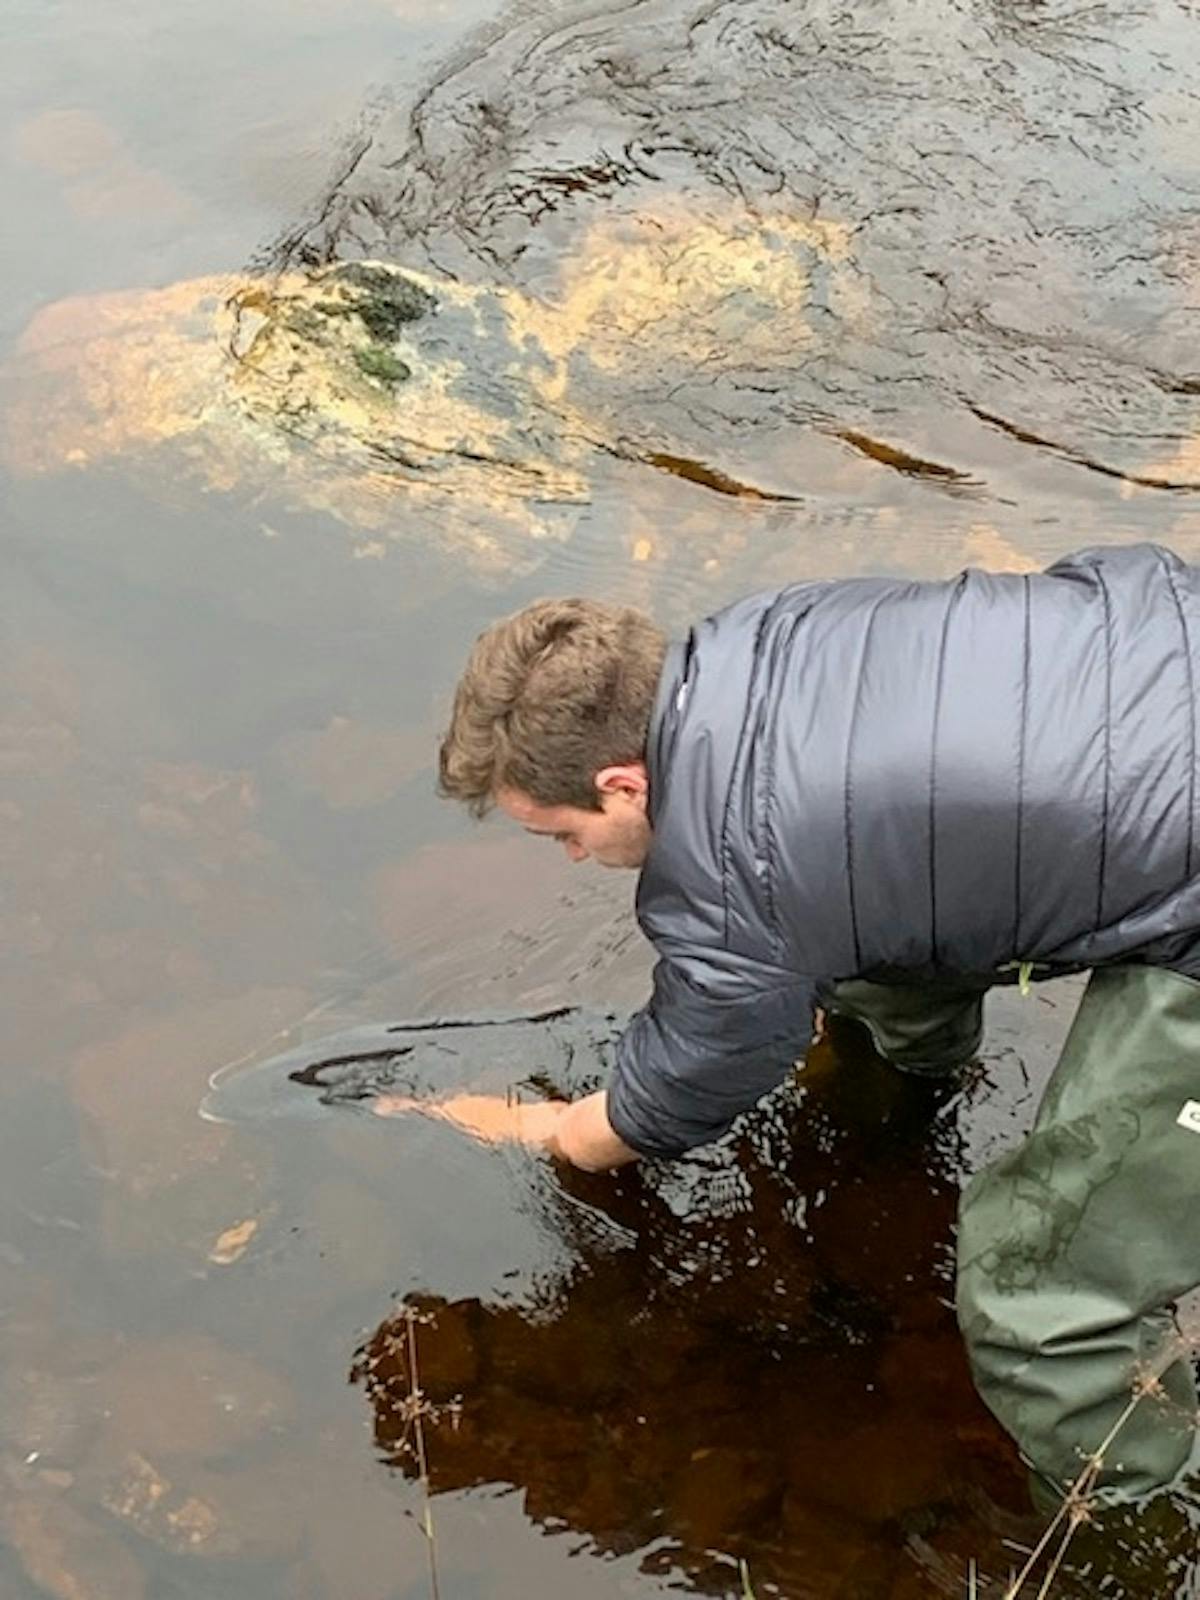 A researcher releases an adult wild Atlantic salmon back in a calm river